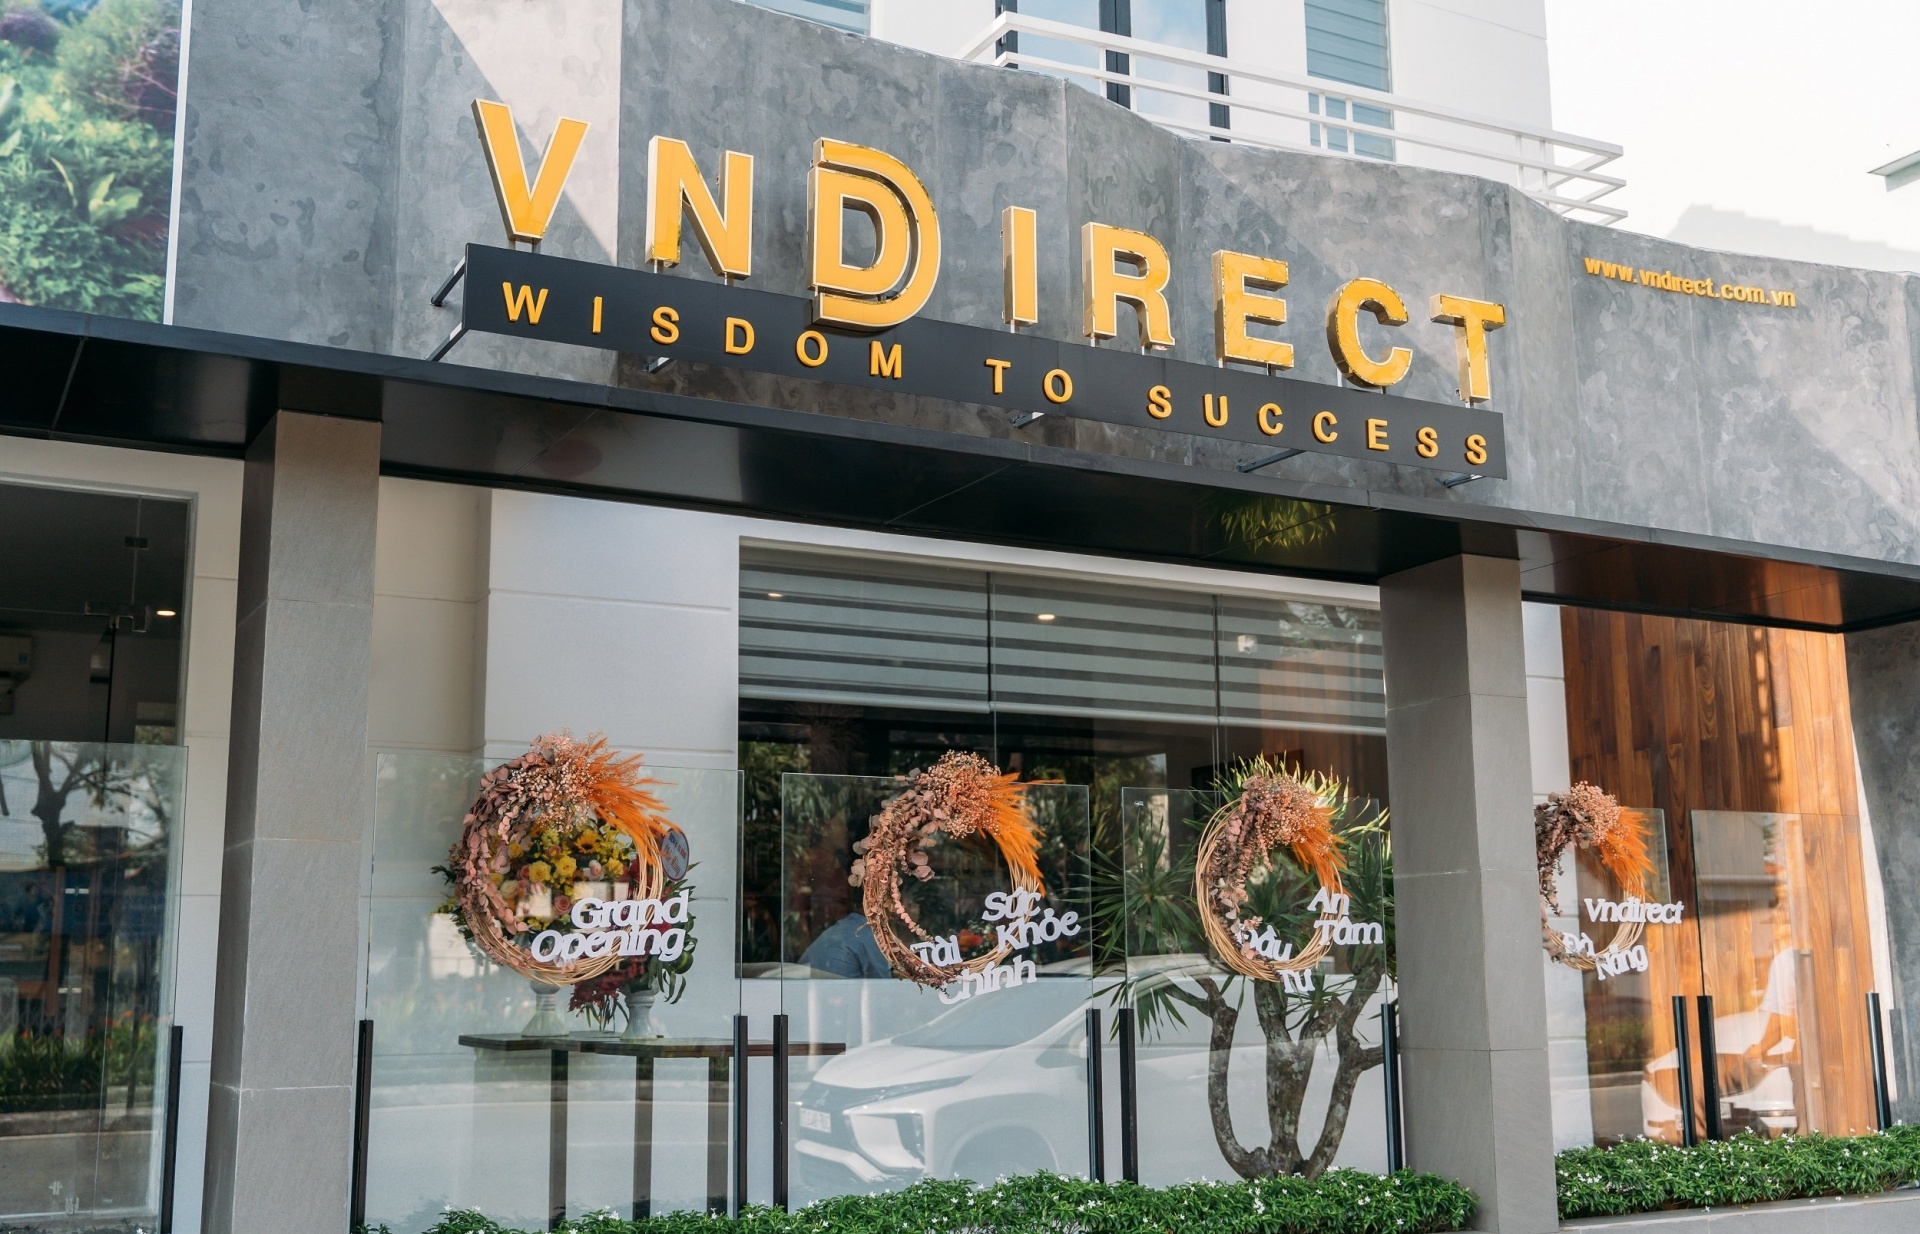 VNDIRECT sign off syndication with foreign financial institutions